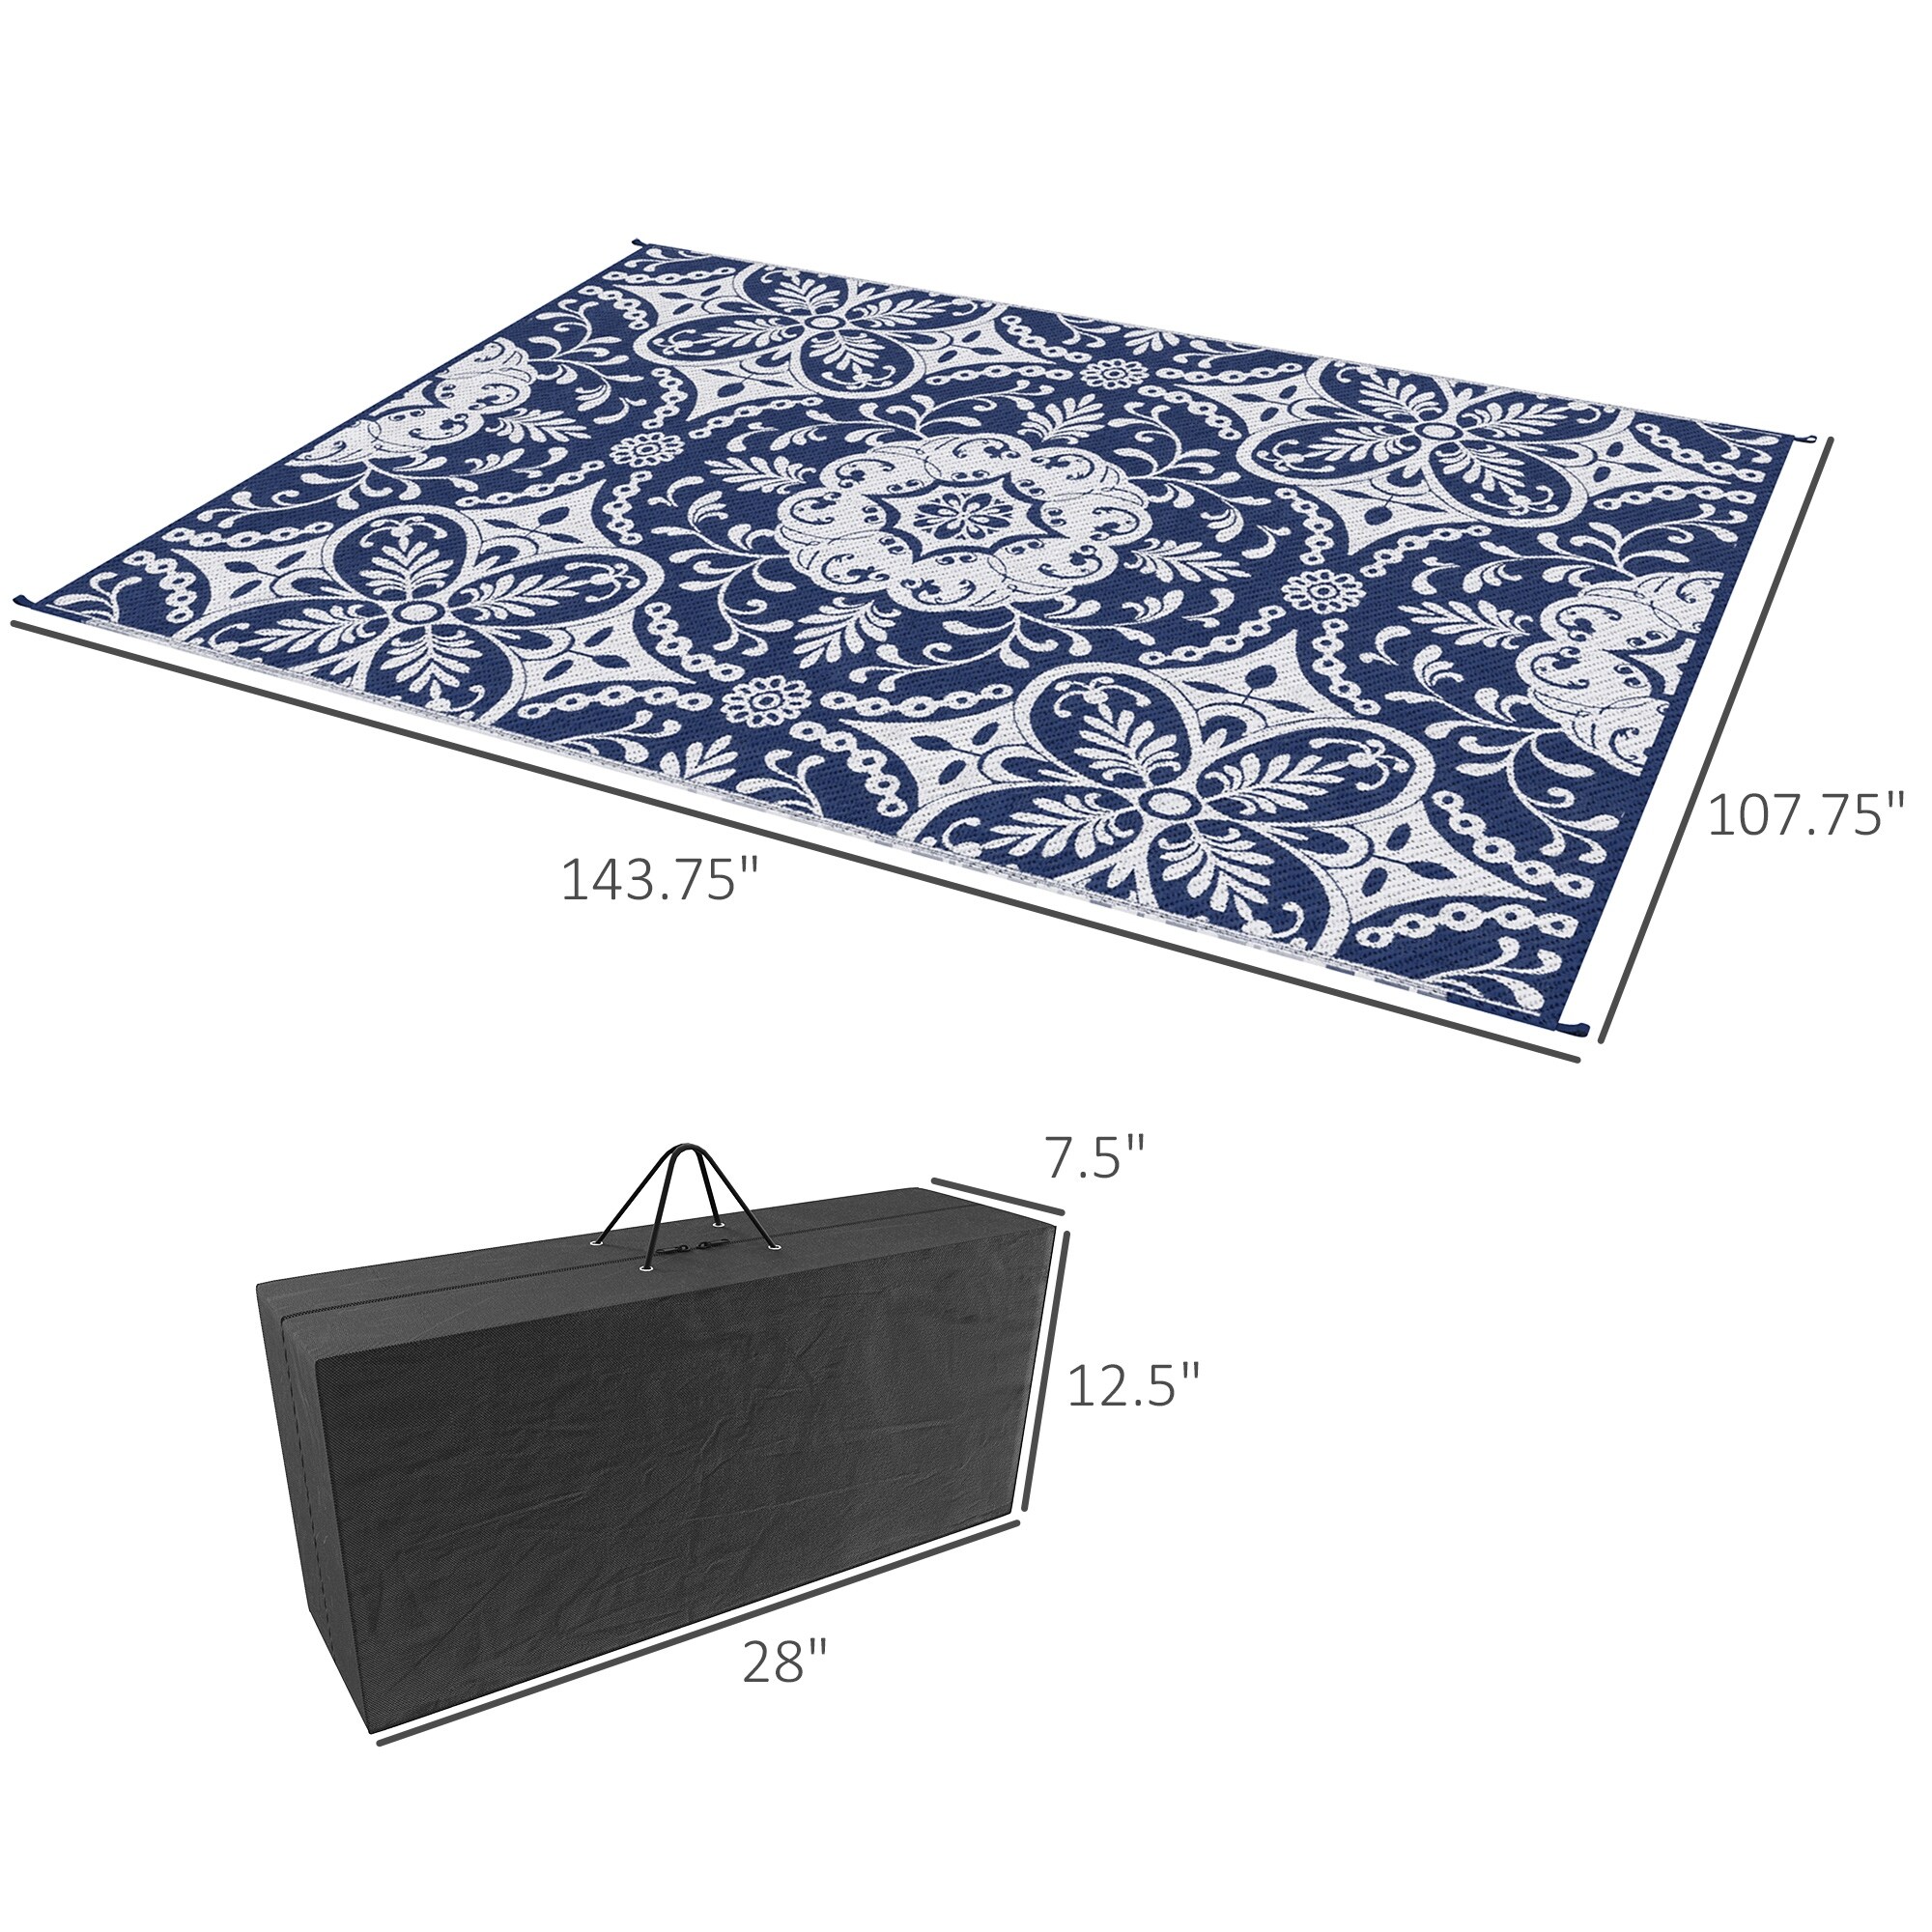 https://ak1.ostkcdn.com/images/products/is/images/direct/505c2602f17c16baaf177c3f0529e6c9273e737a/Outsunny-RV-Mat%2C-Outdoor-Patio-Rug---Large-Camping-Carpet-with-Carrying-Bag%2C-9%27-x-12%27%2C-Waterproof-Plastic-Straw.jpg